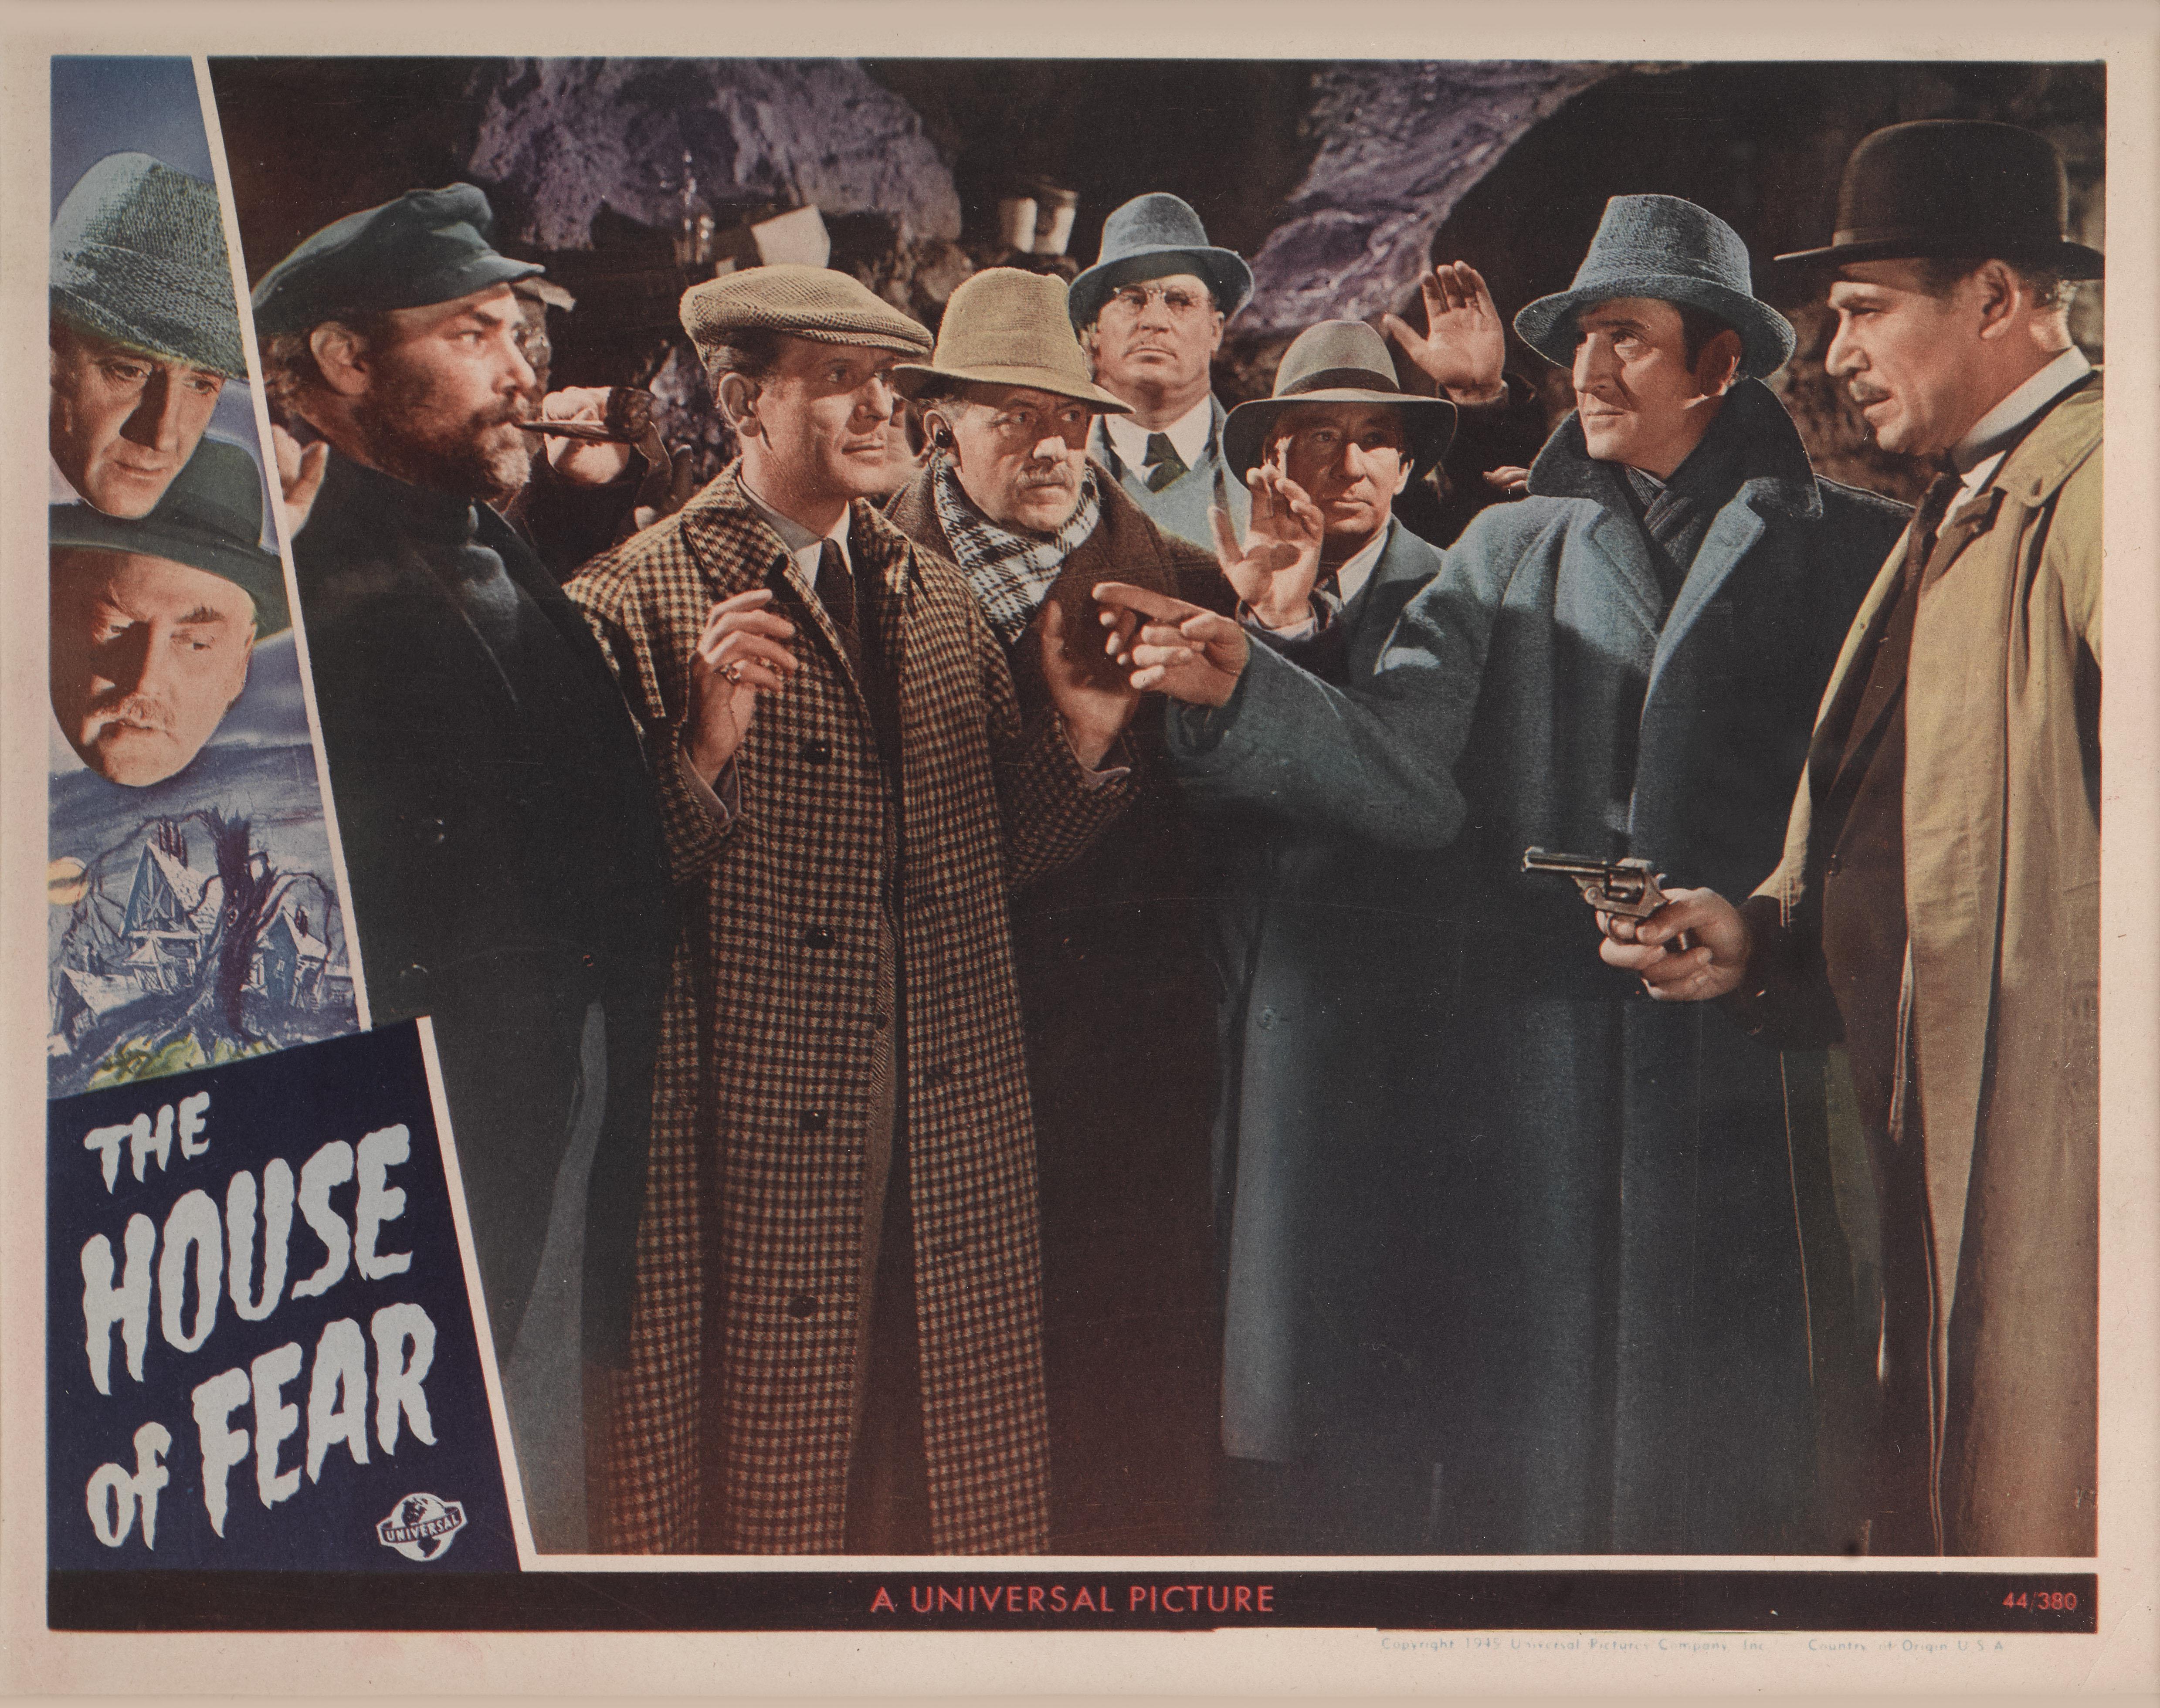 Original US lobby card for the 1945 Film Noir Mystery House of Fear.
This film starred Basil Rathbone as Sherlock Holmes and Nigel Bruce as Doctor Watson.
The film was directed by Roy William Neill.
This lobby card is conservation framed with UV